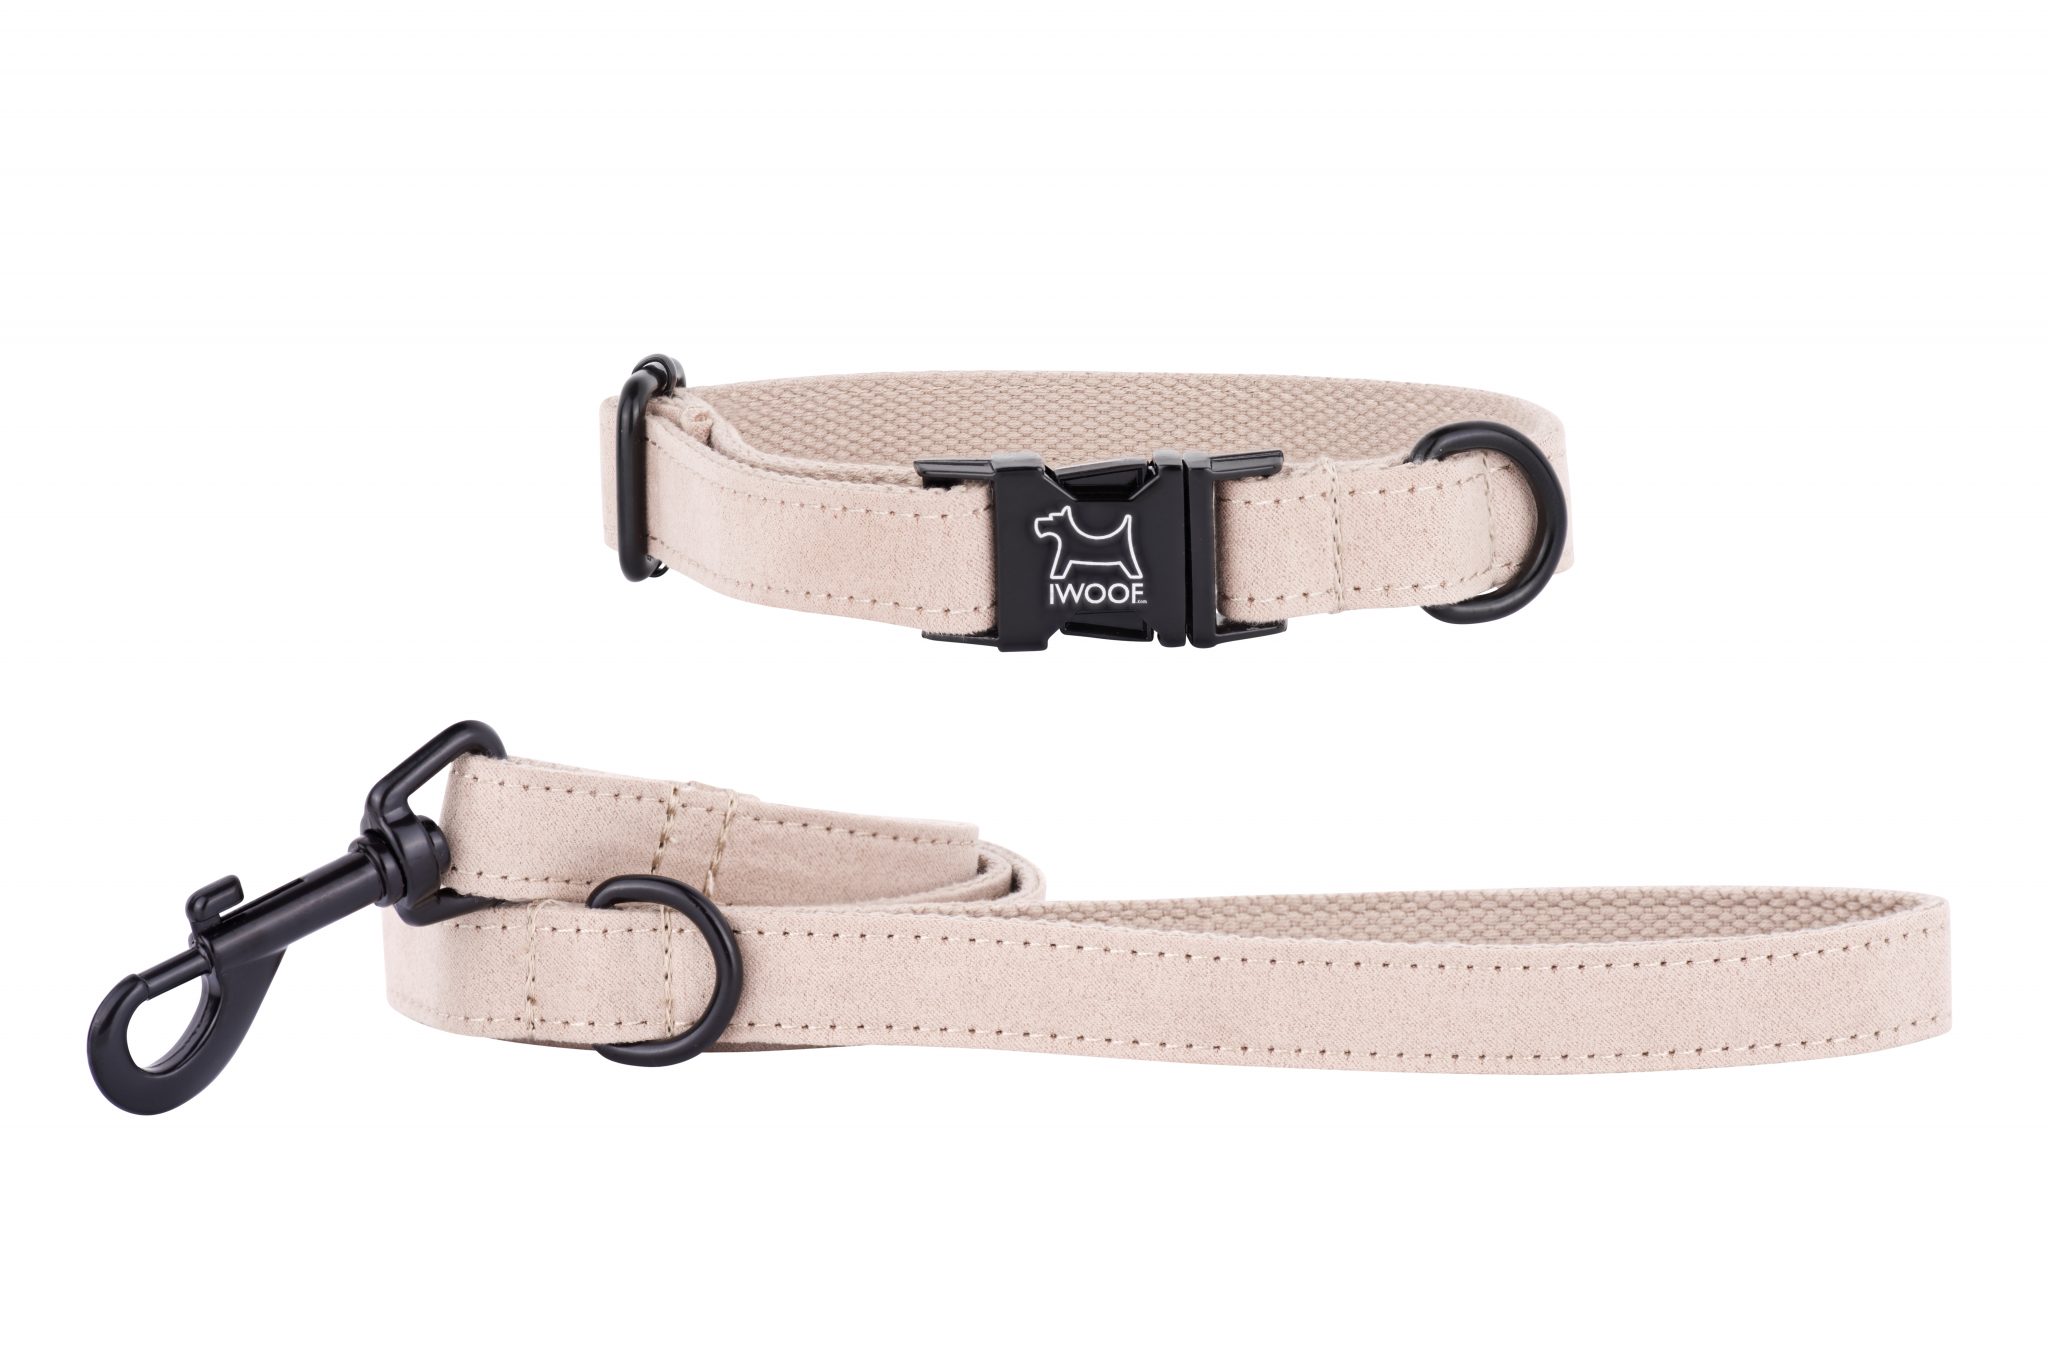 Sand Dune designer dog collar and matching dog lead by IWOOF with black fittings